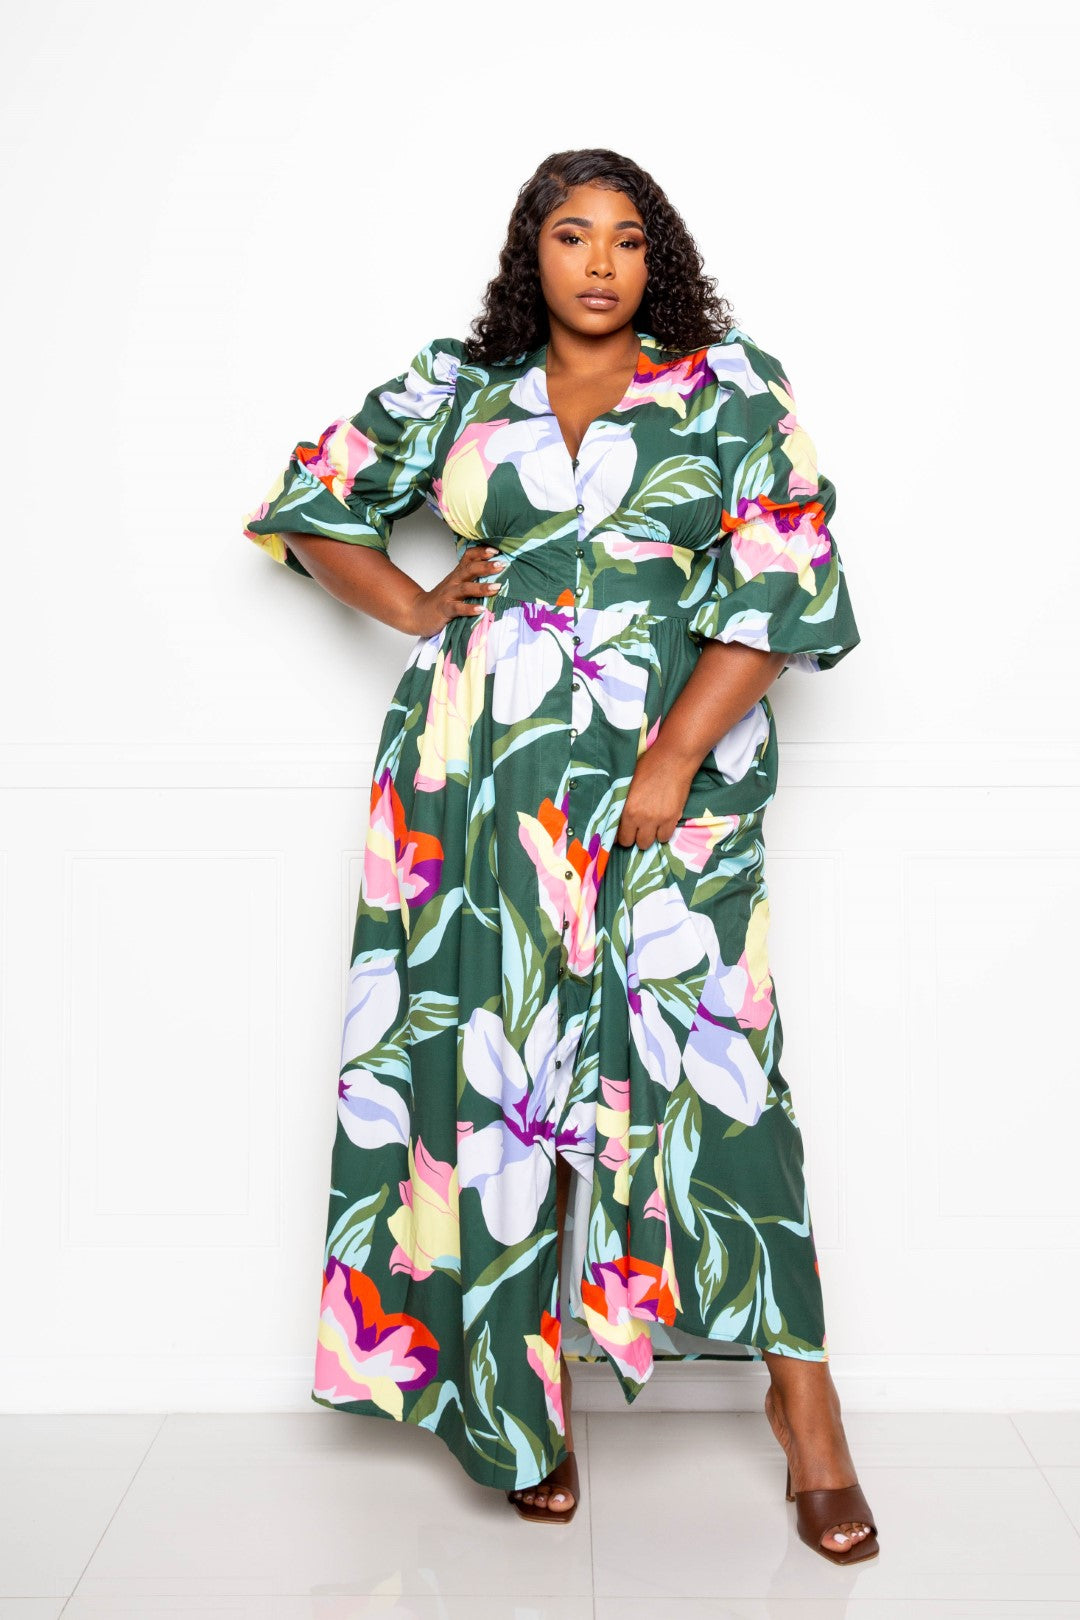 Puff Sleeve Button Front Dress | Black Multi, Olive Multi, PLUS SIZE, PLUS SIZE DRESSES, SALE, SALE PLUS SIZE, White Multi | Style Your Curves